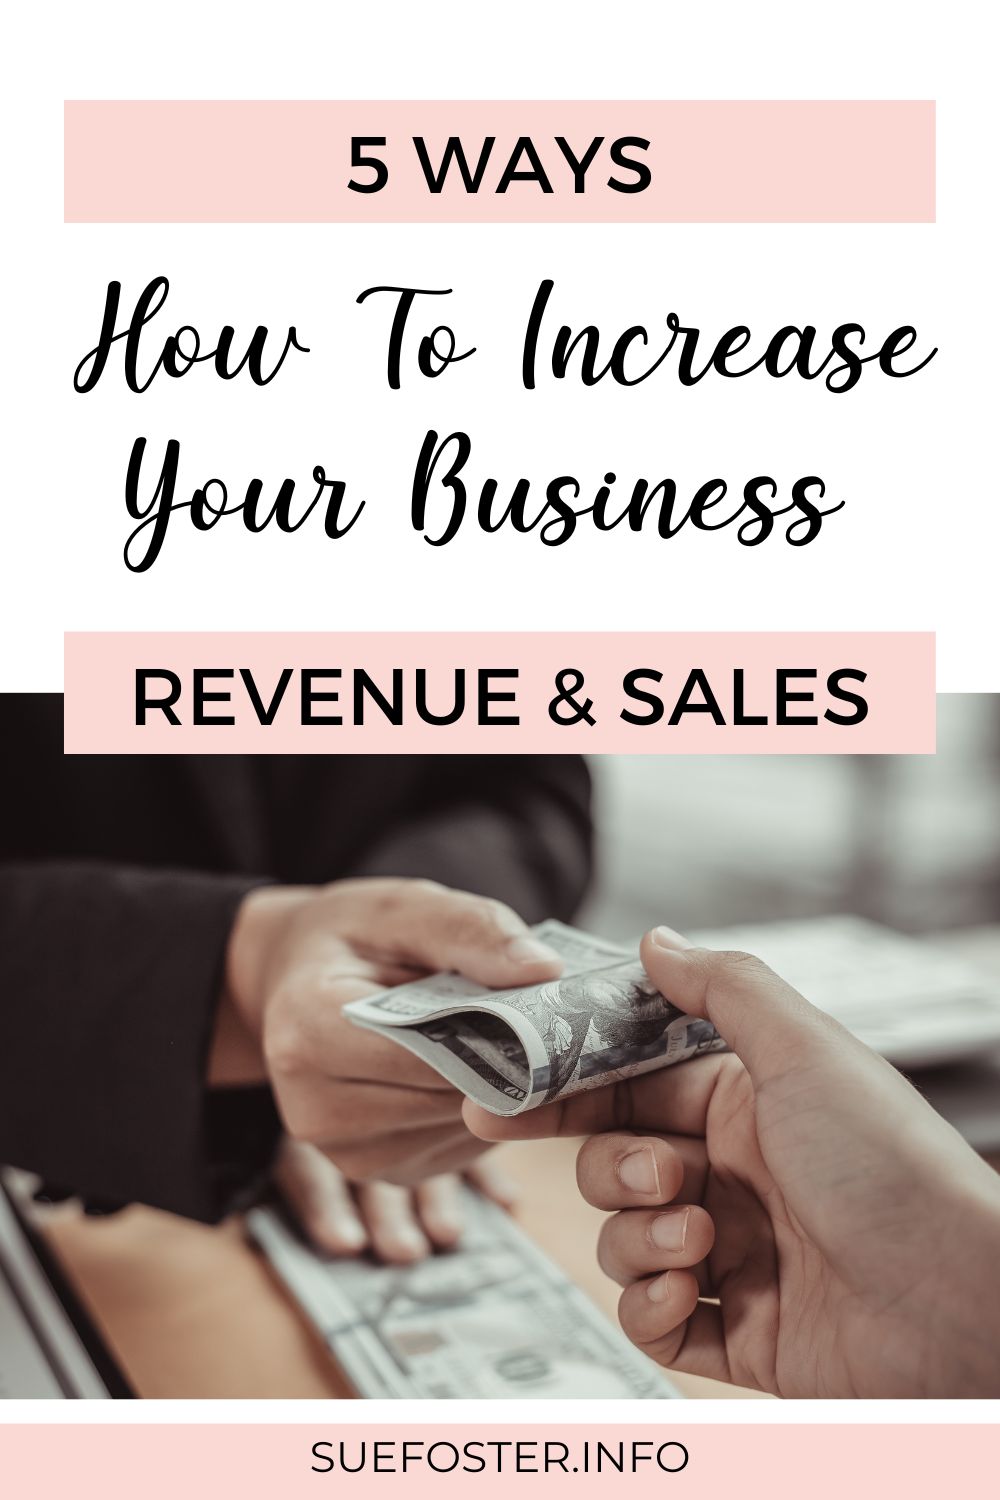 Cash flow is essential in keeping a business running. Here are some ways you can increase your sales and revenue.